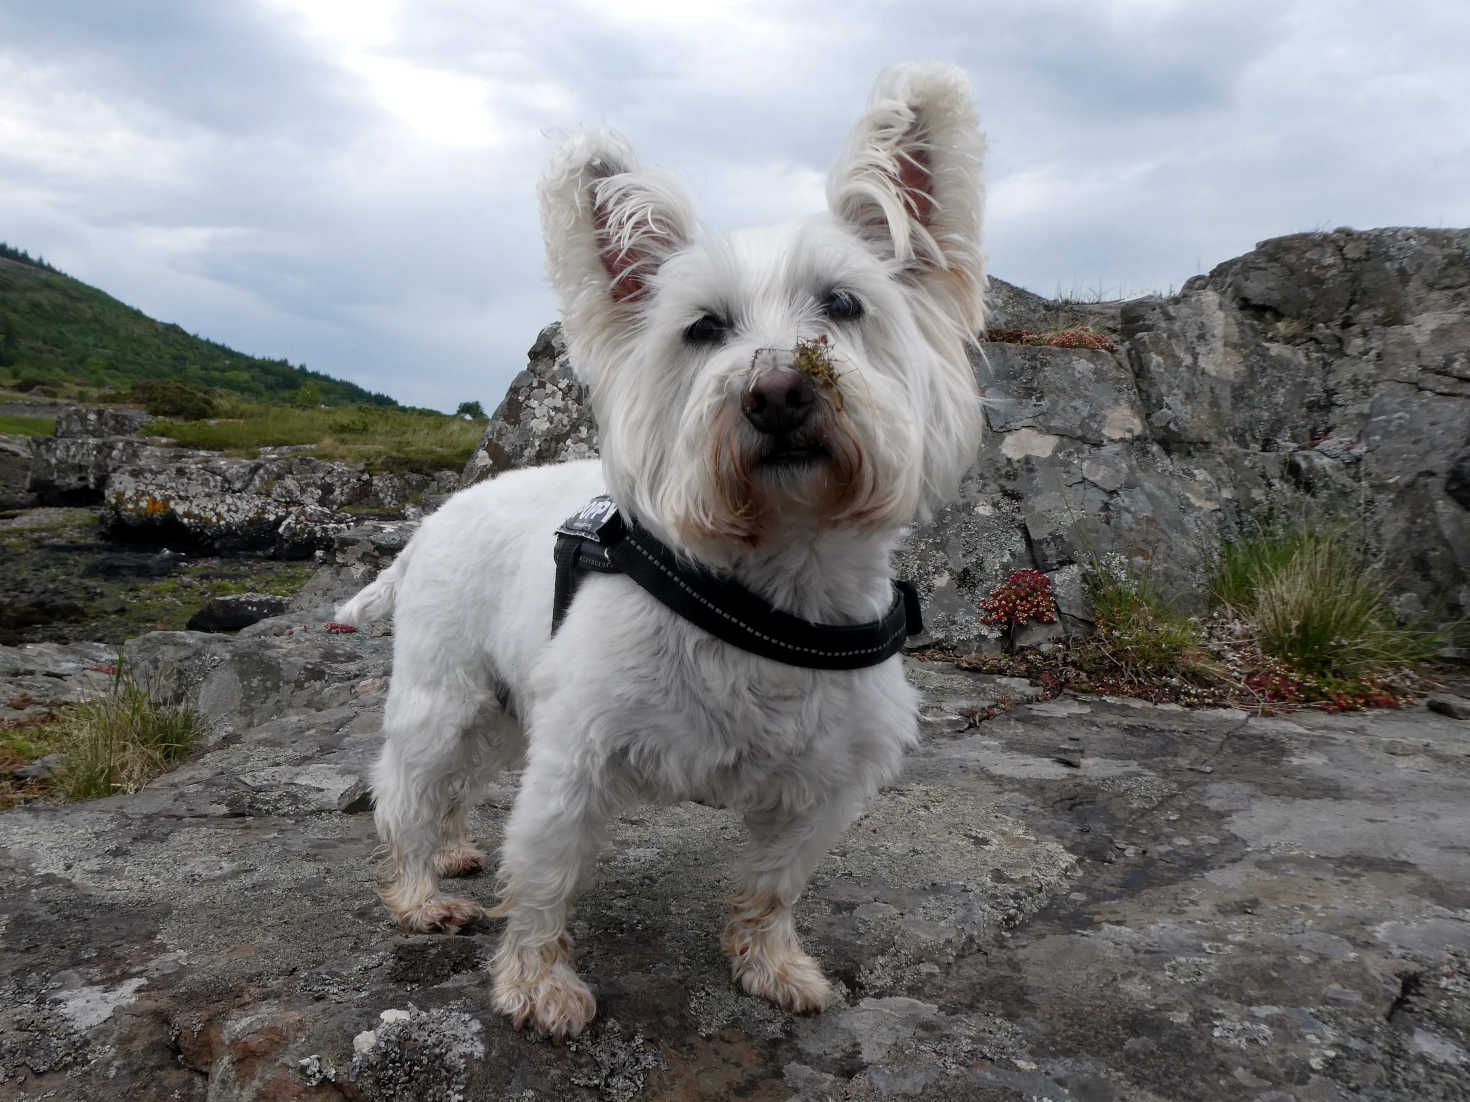 Poppy the Westie after food search at Glenforsa Mull